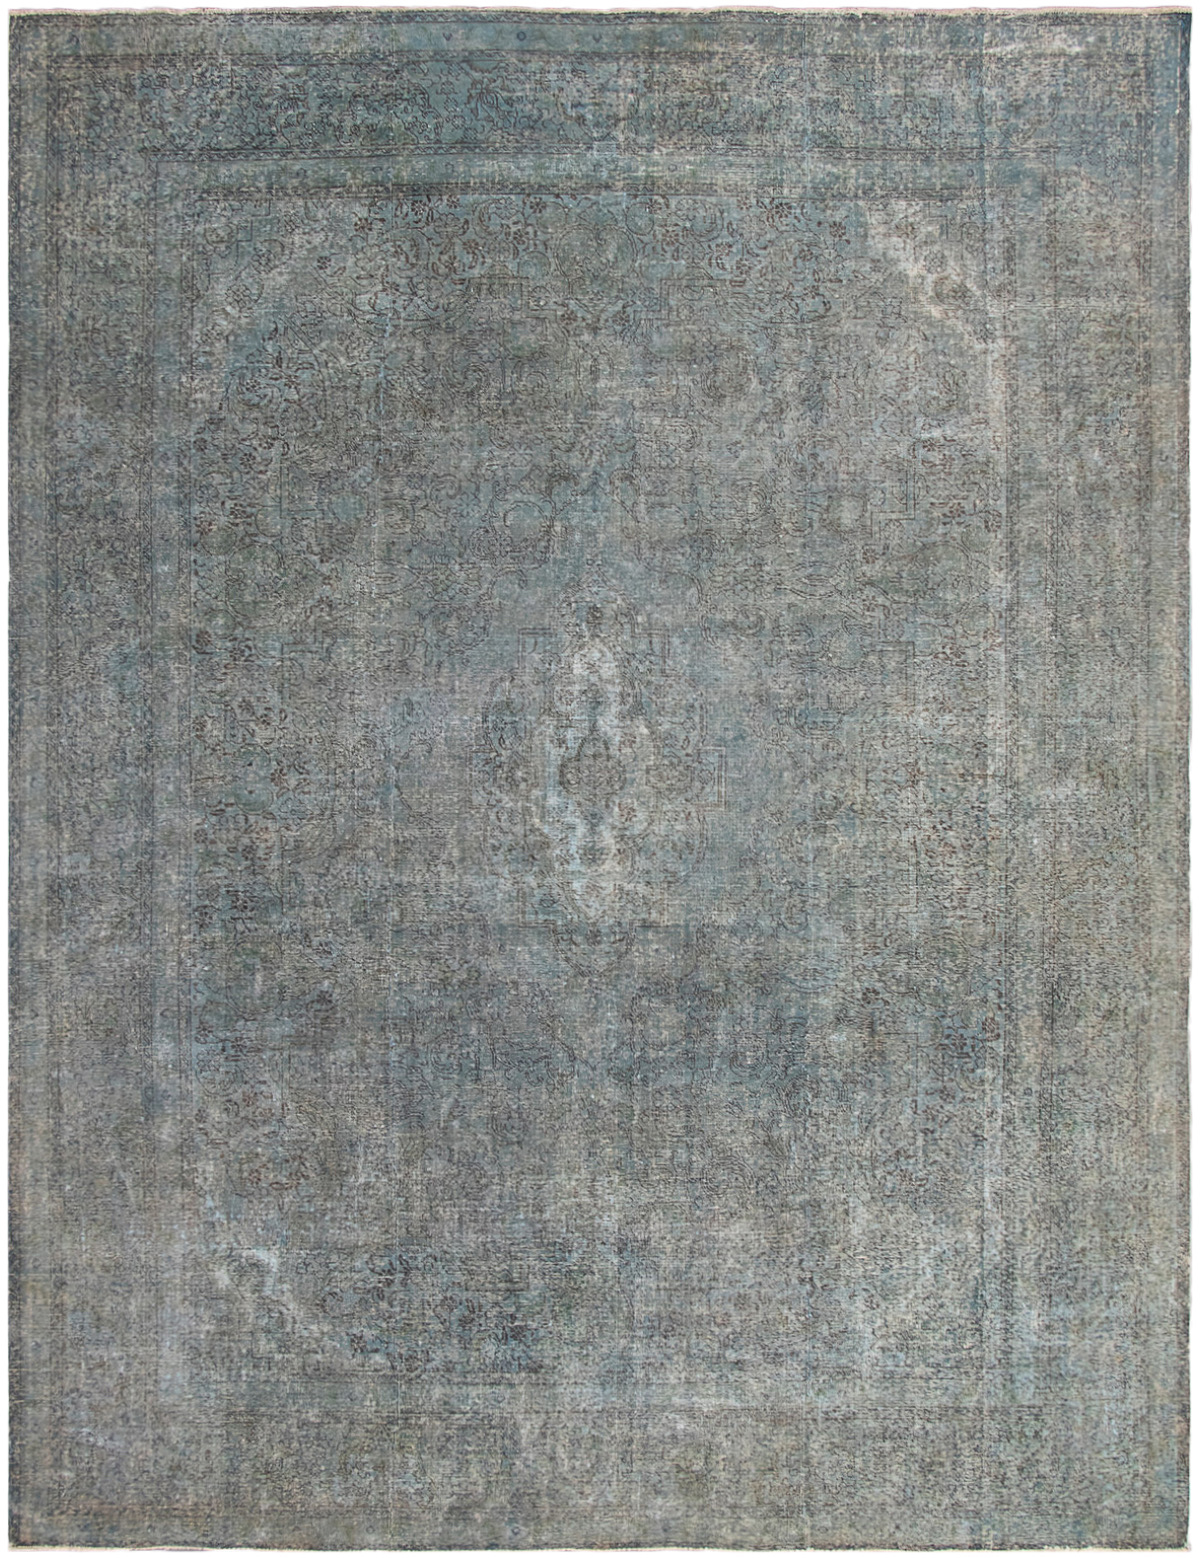 Hand-knotted Color Transition Turquoise Wool Rug 10'0" x 13'1" Size: 10'0" x 13'1"  